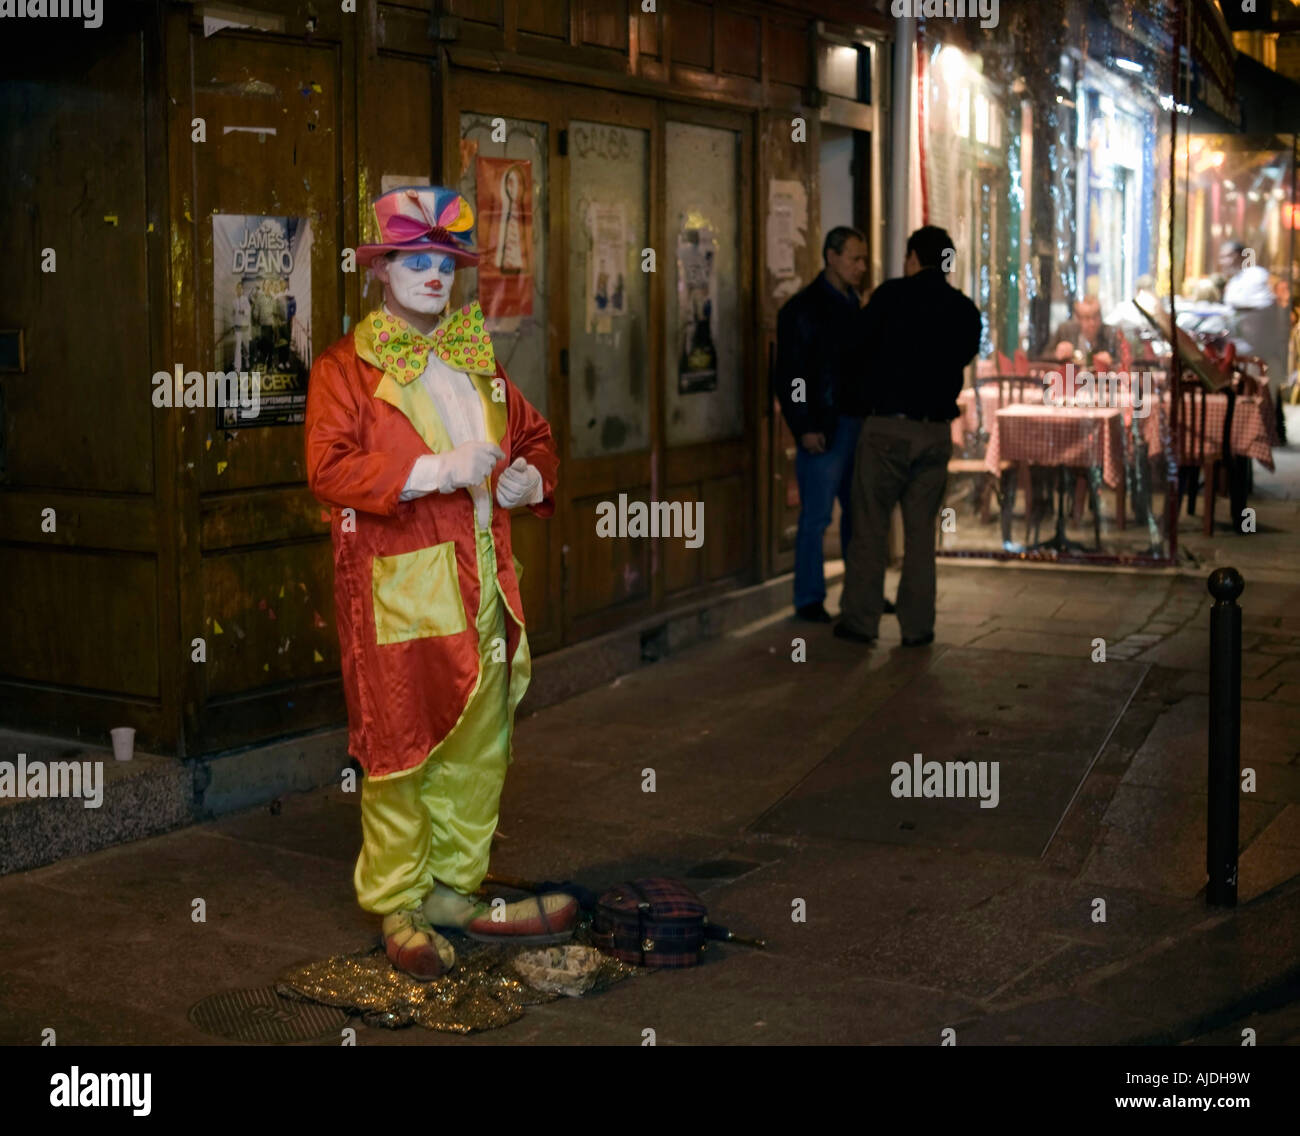 Street performer and entertainer dressed as a clown in Saint Michel a famous tourist destination for dining and entertainment o Stock Photo